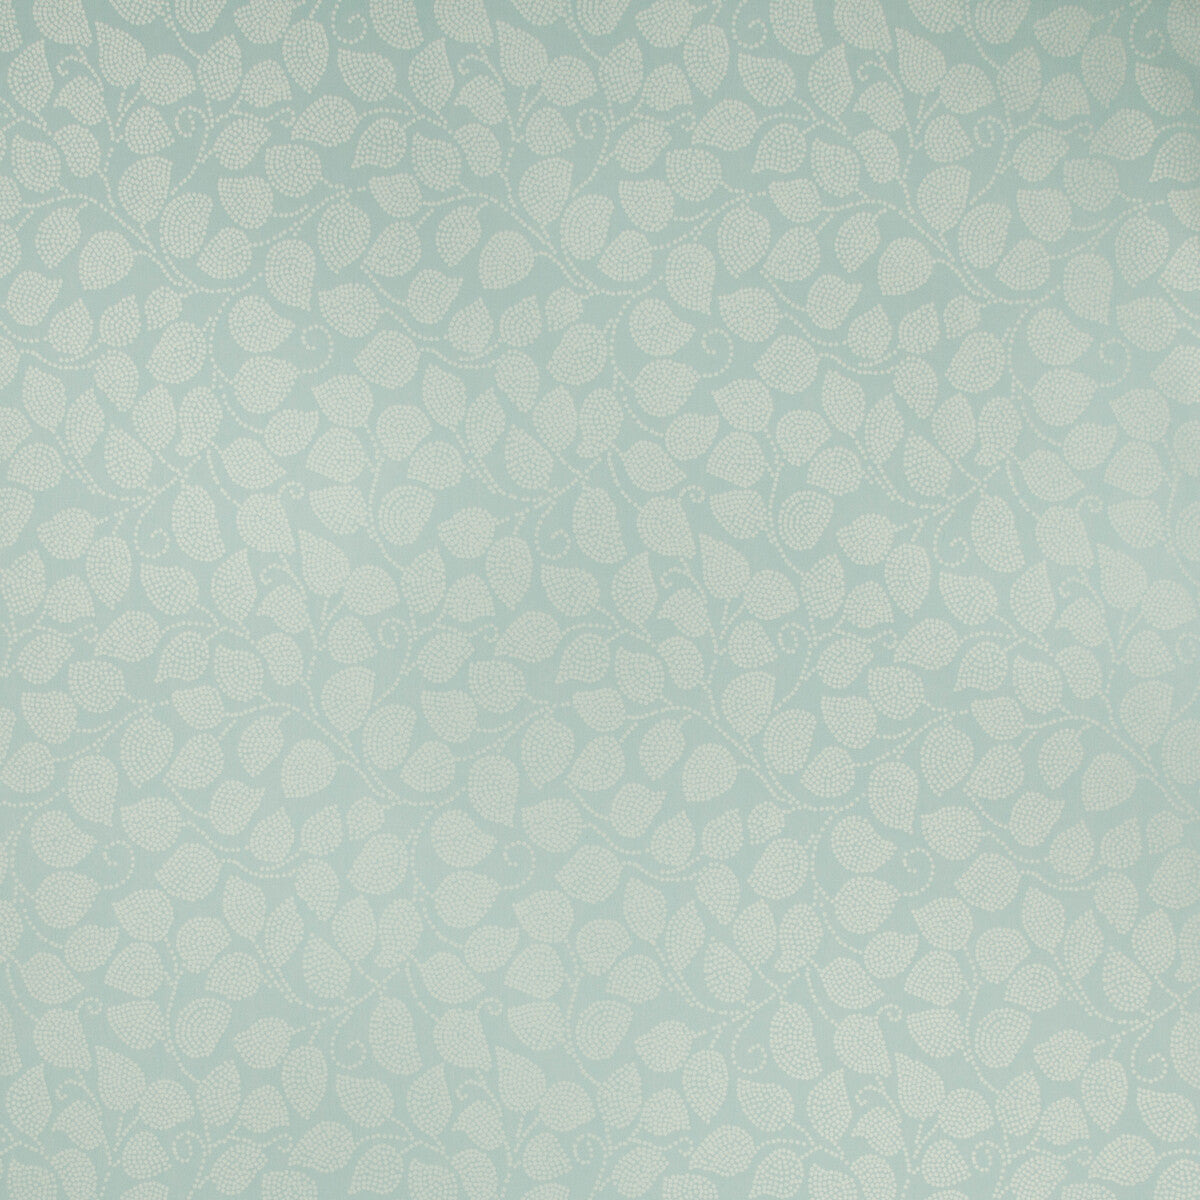 Dotted Leaves fabric in santorini color - pattern 4627.15.0 - by Kravet Contract in the Privacy Curtains collection